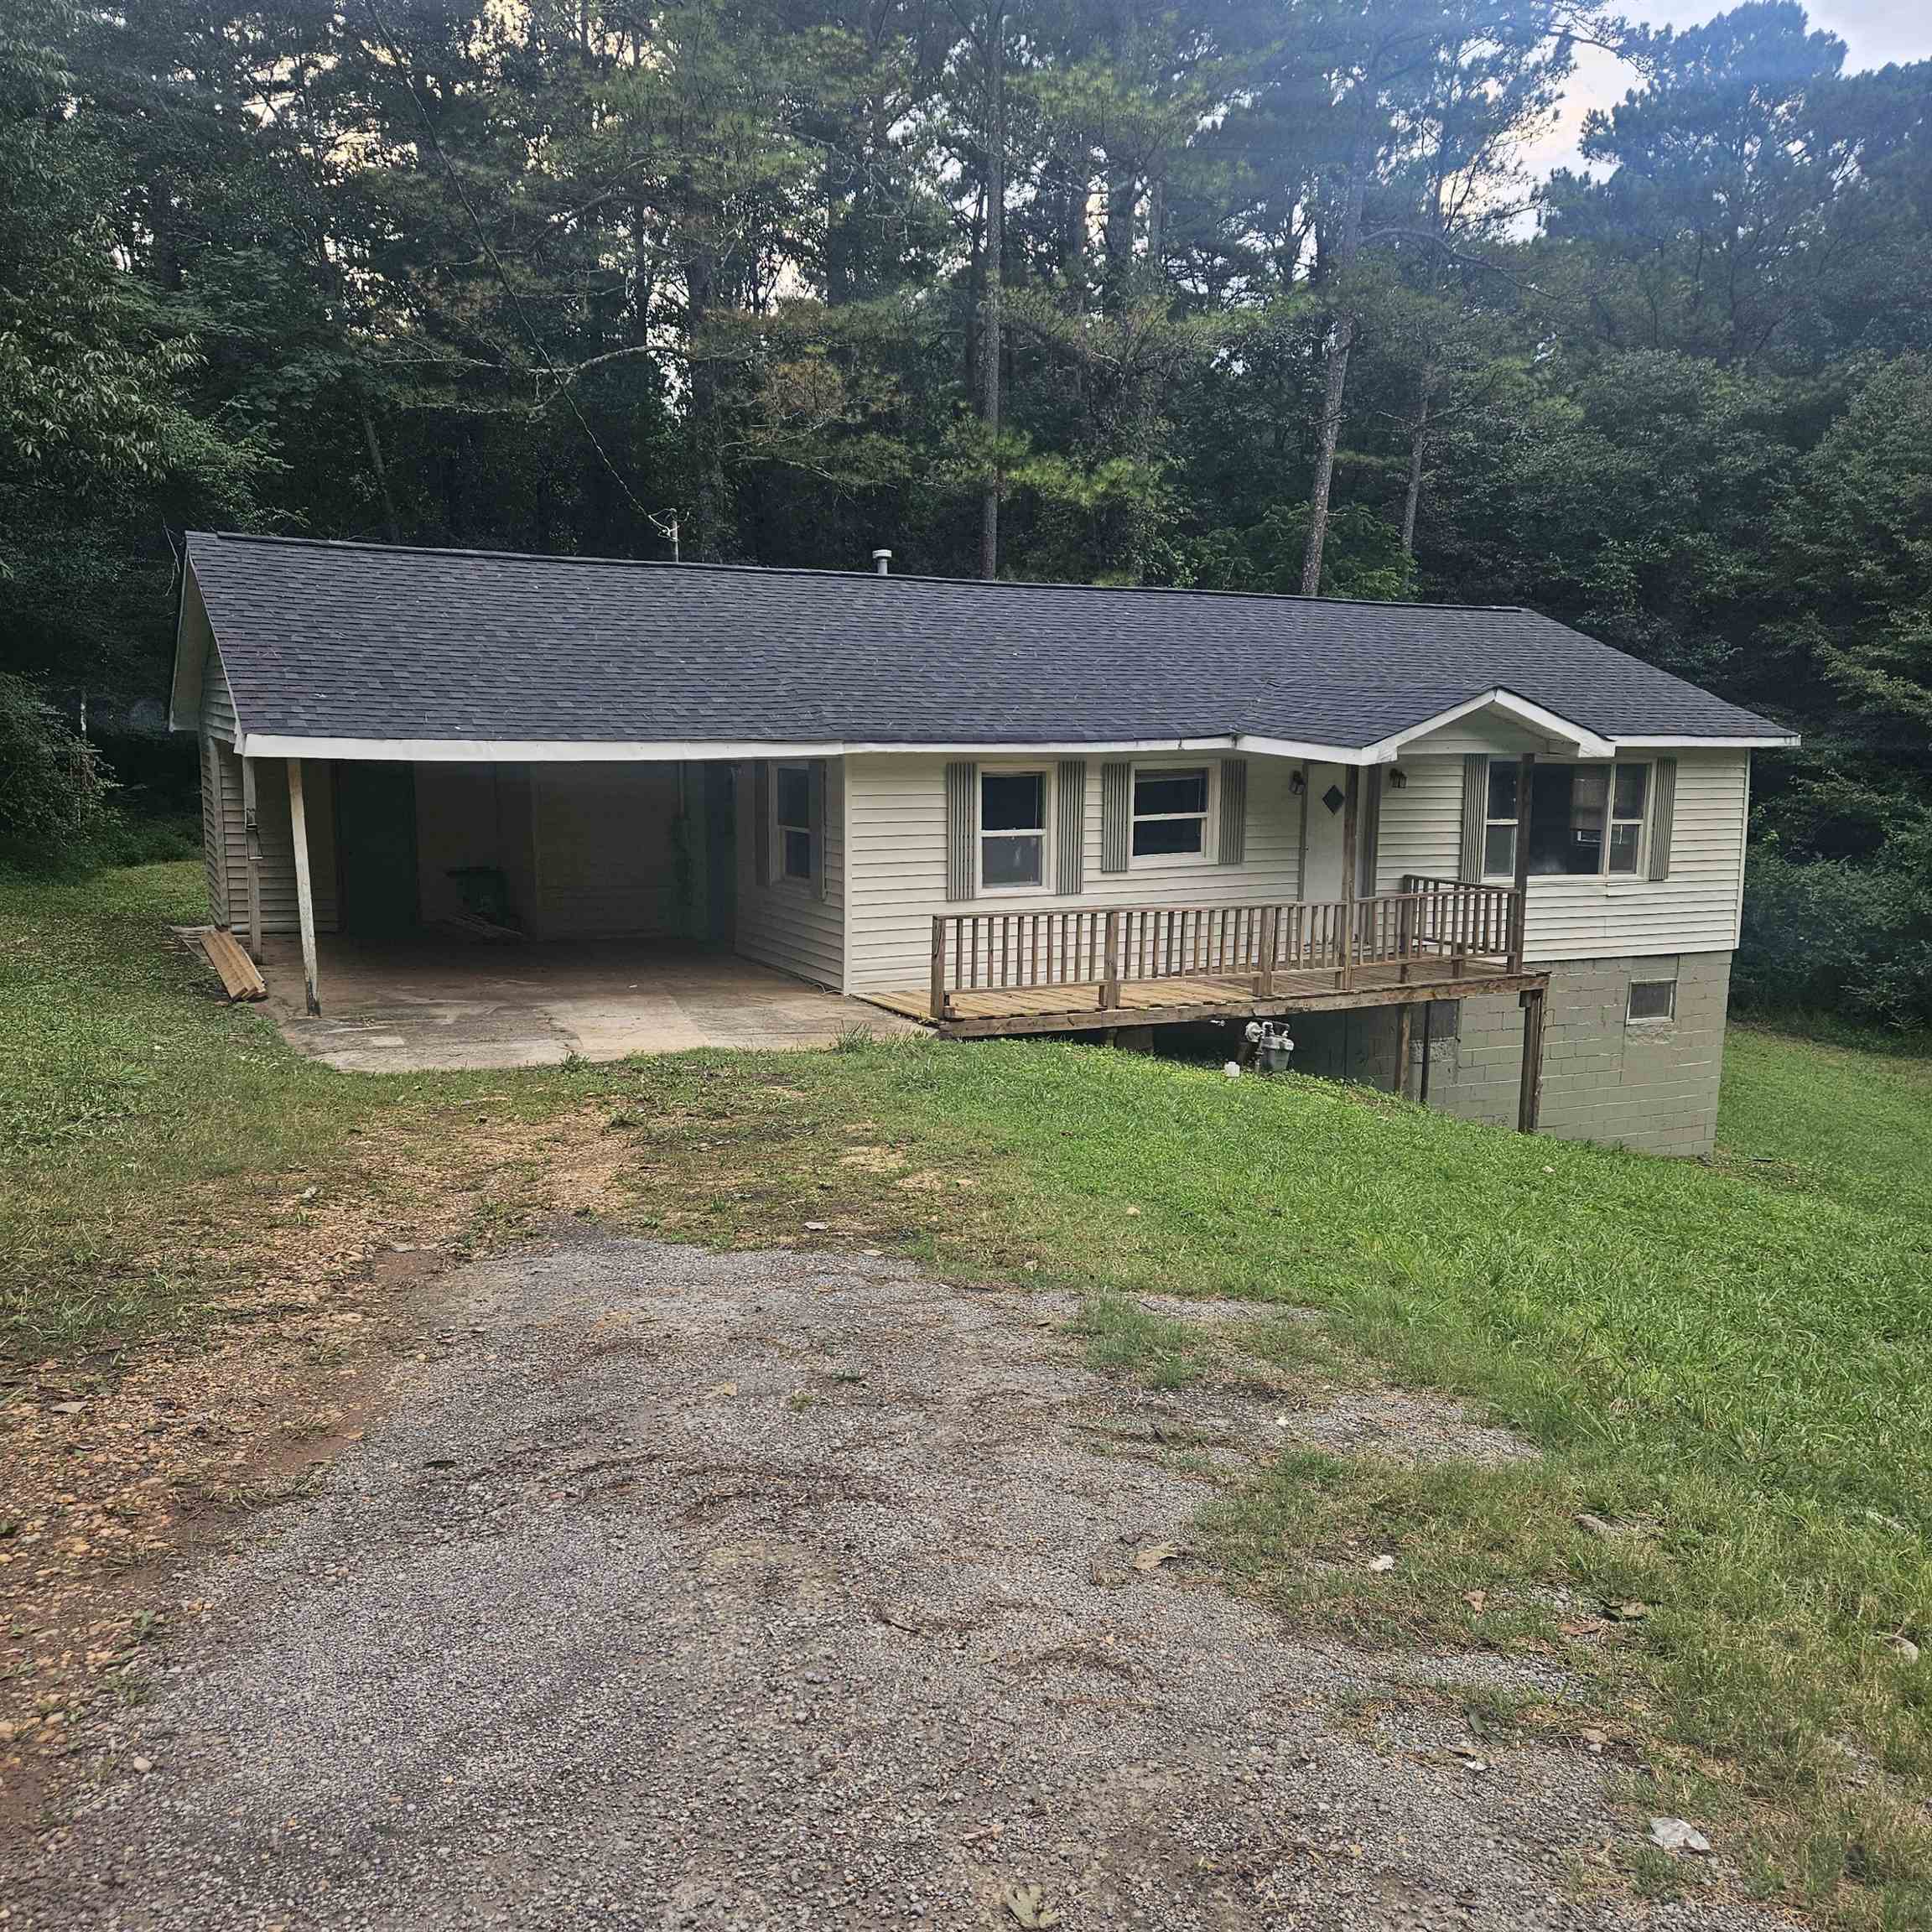 3 Bedroom, 1 bath home located just minutes from downtown Russellville.  New roof in 2023.  Hablo Espanol